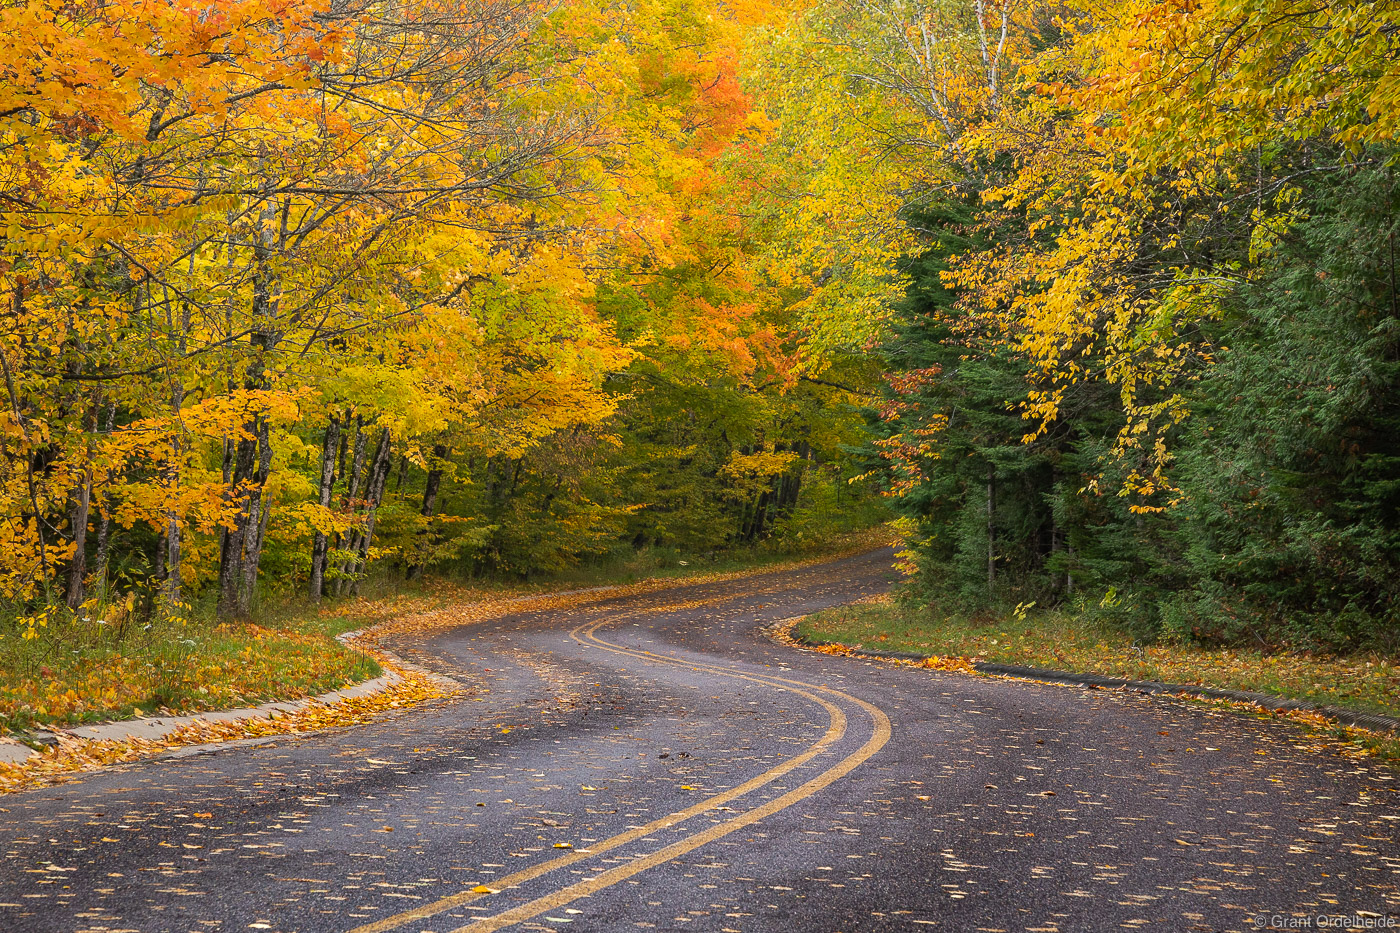 A winding road through the fall foliage of Pictured Rocks National Lakeshore near Munising, Michigan.